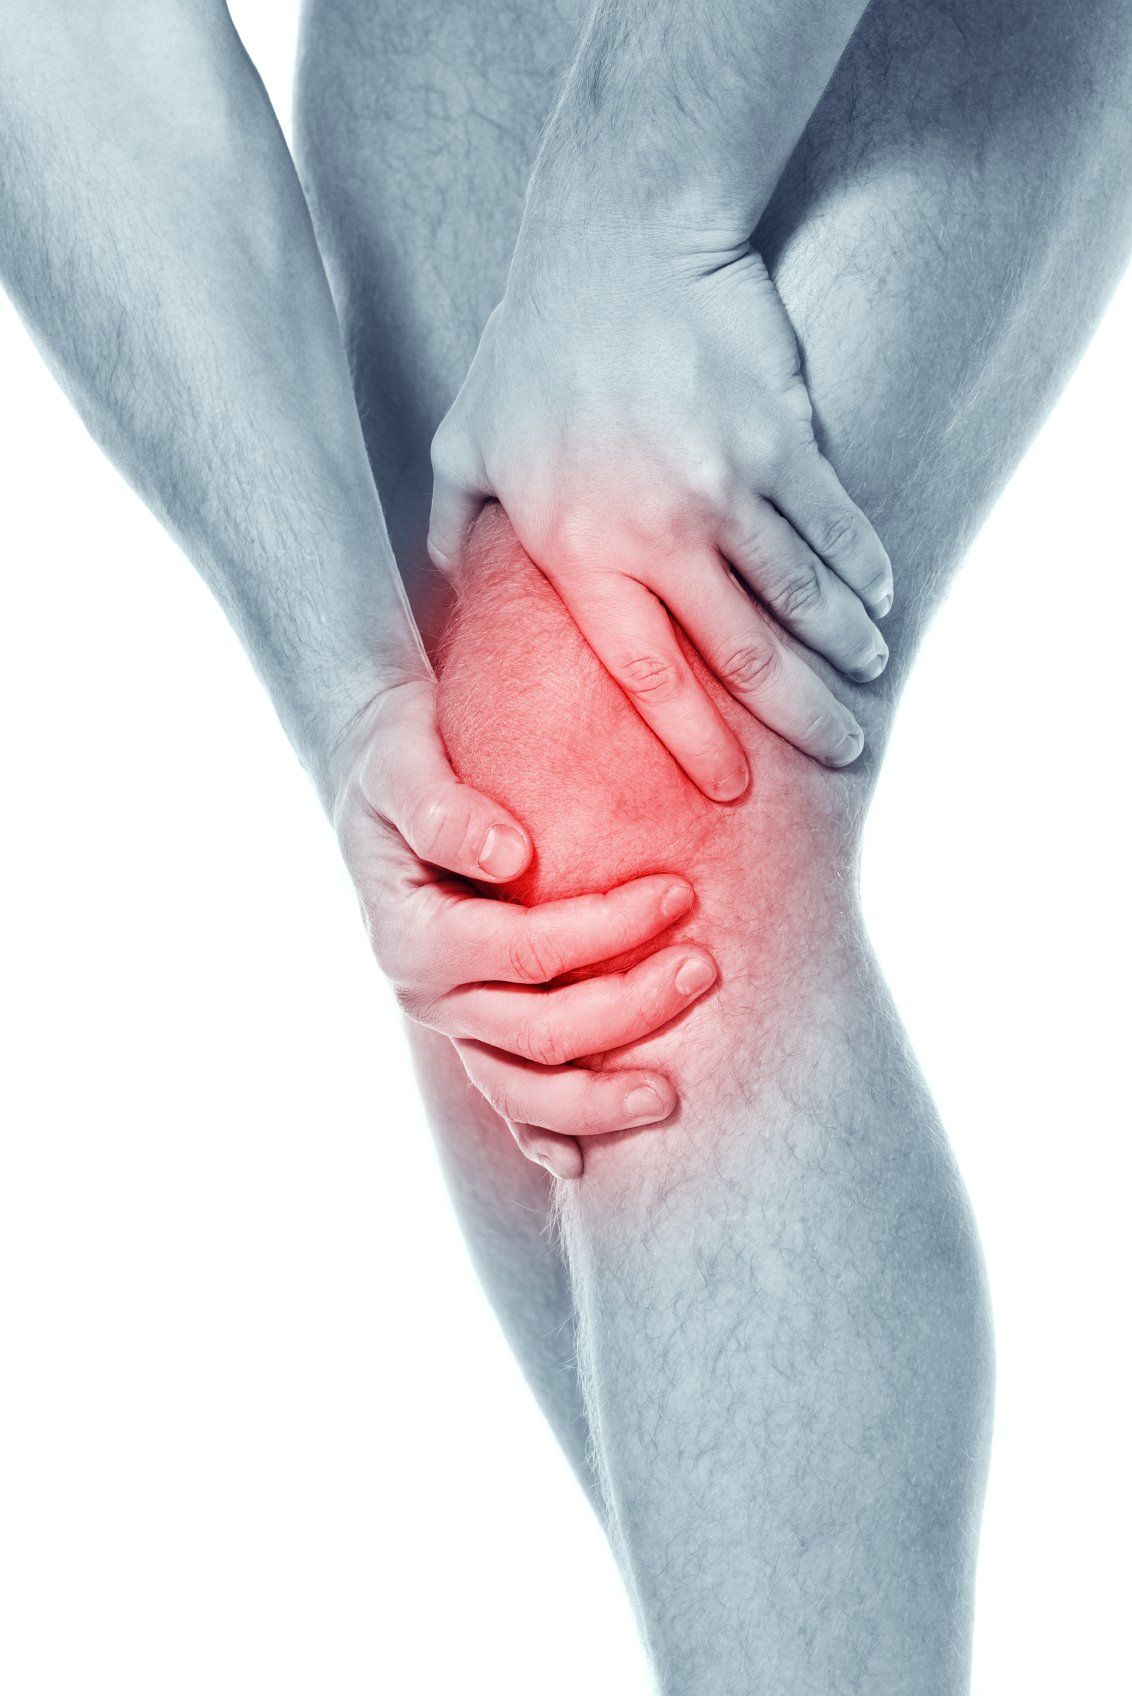 Knee Arthritis - a review on exercise, weight loss, and physical therapy!